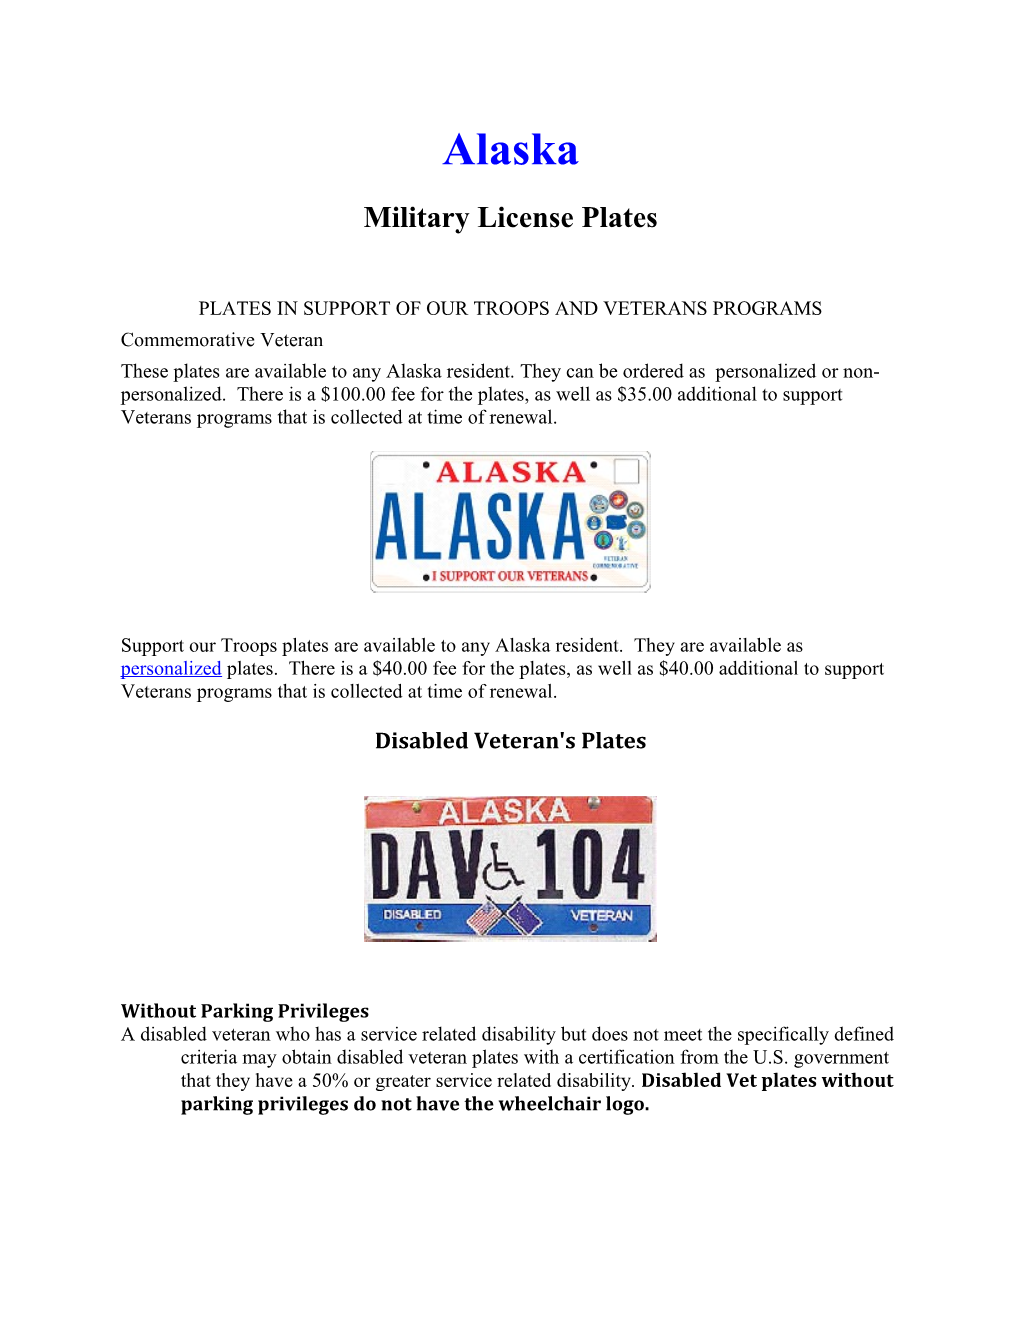 Plates in Support of Our Troops and Veterans Programs